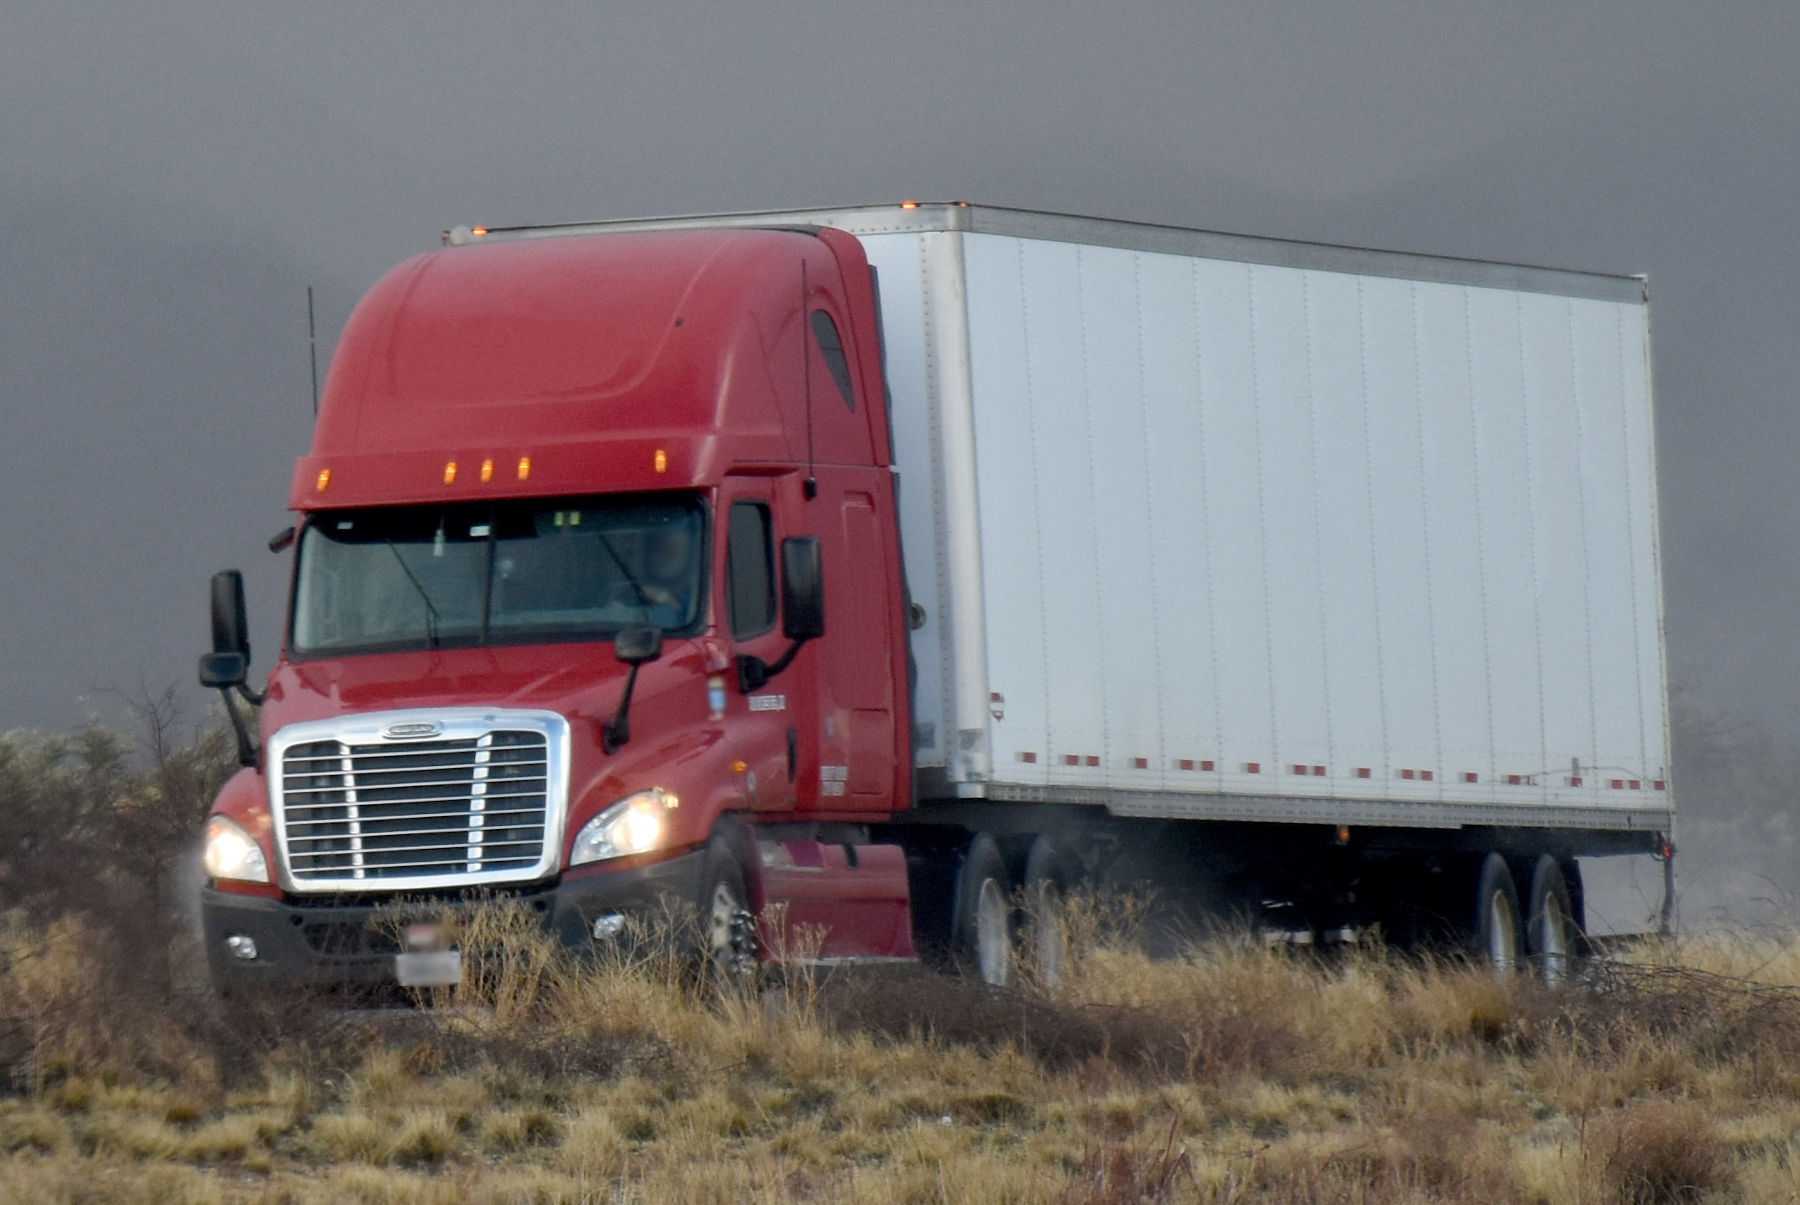 5 Ways to Stay Safe When Driving a Big Rig